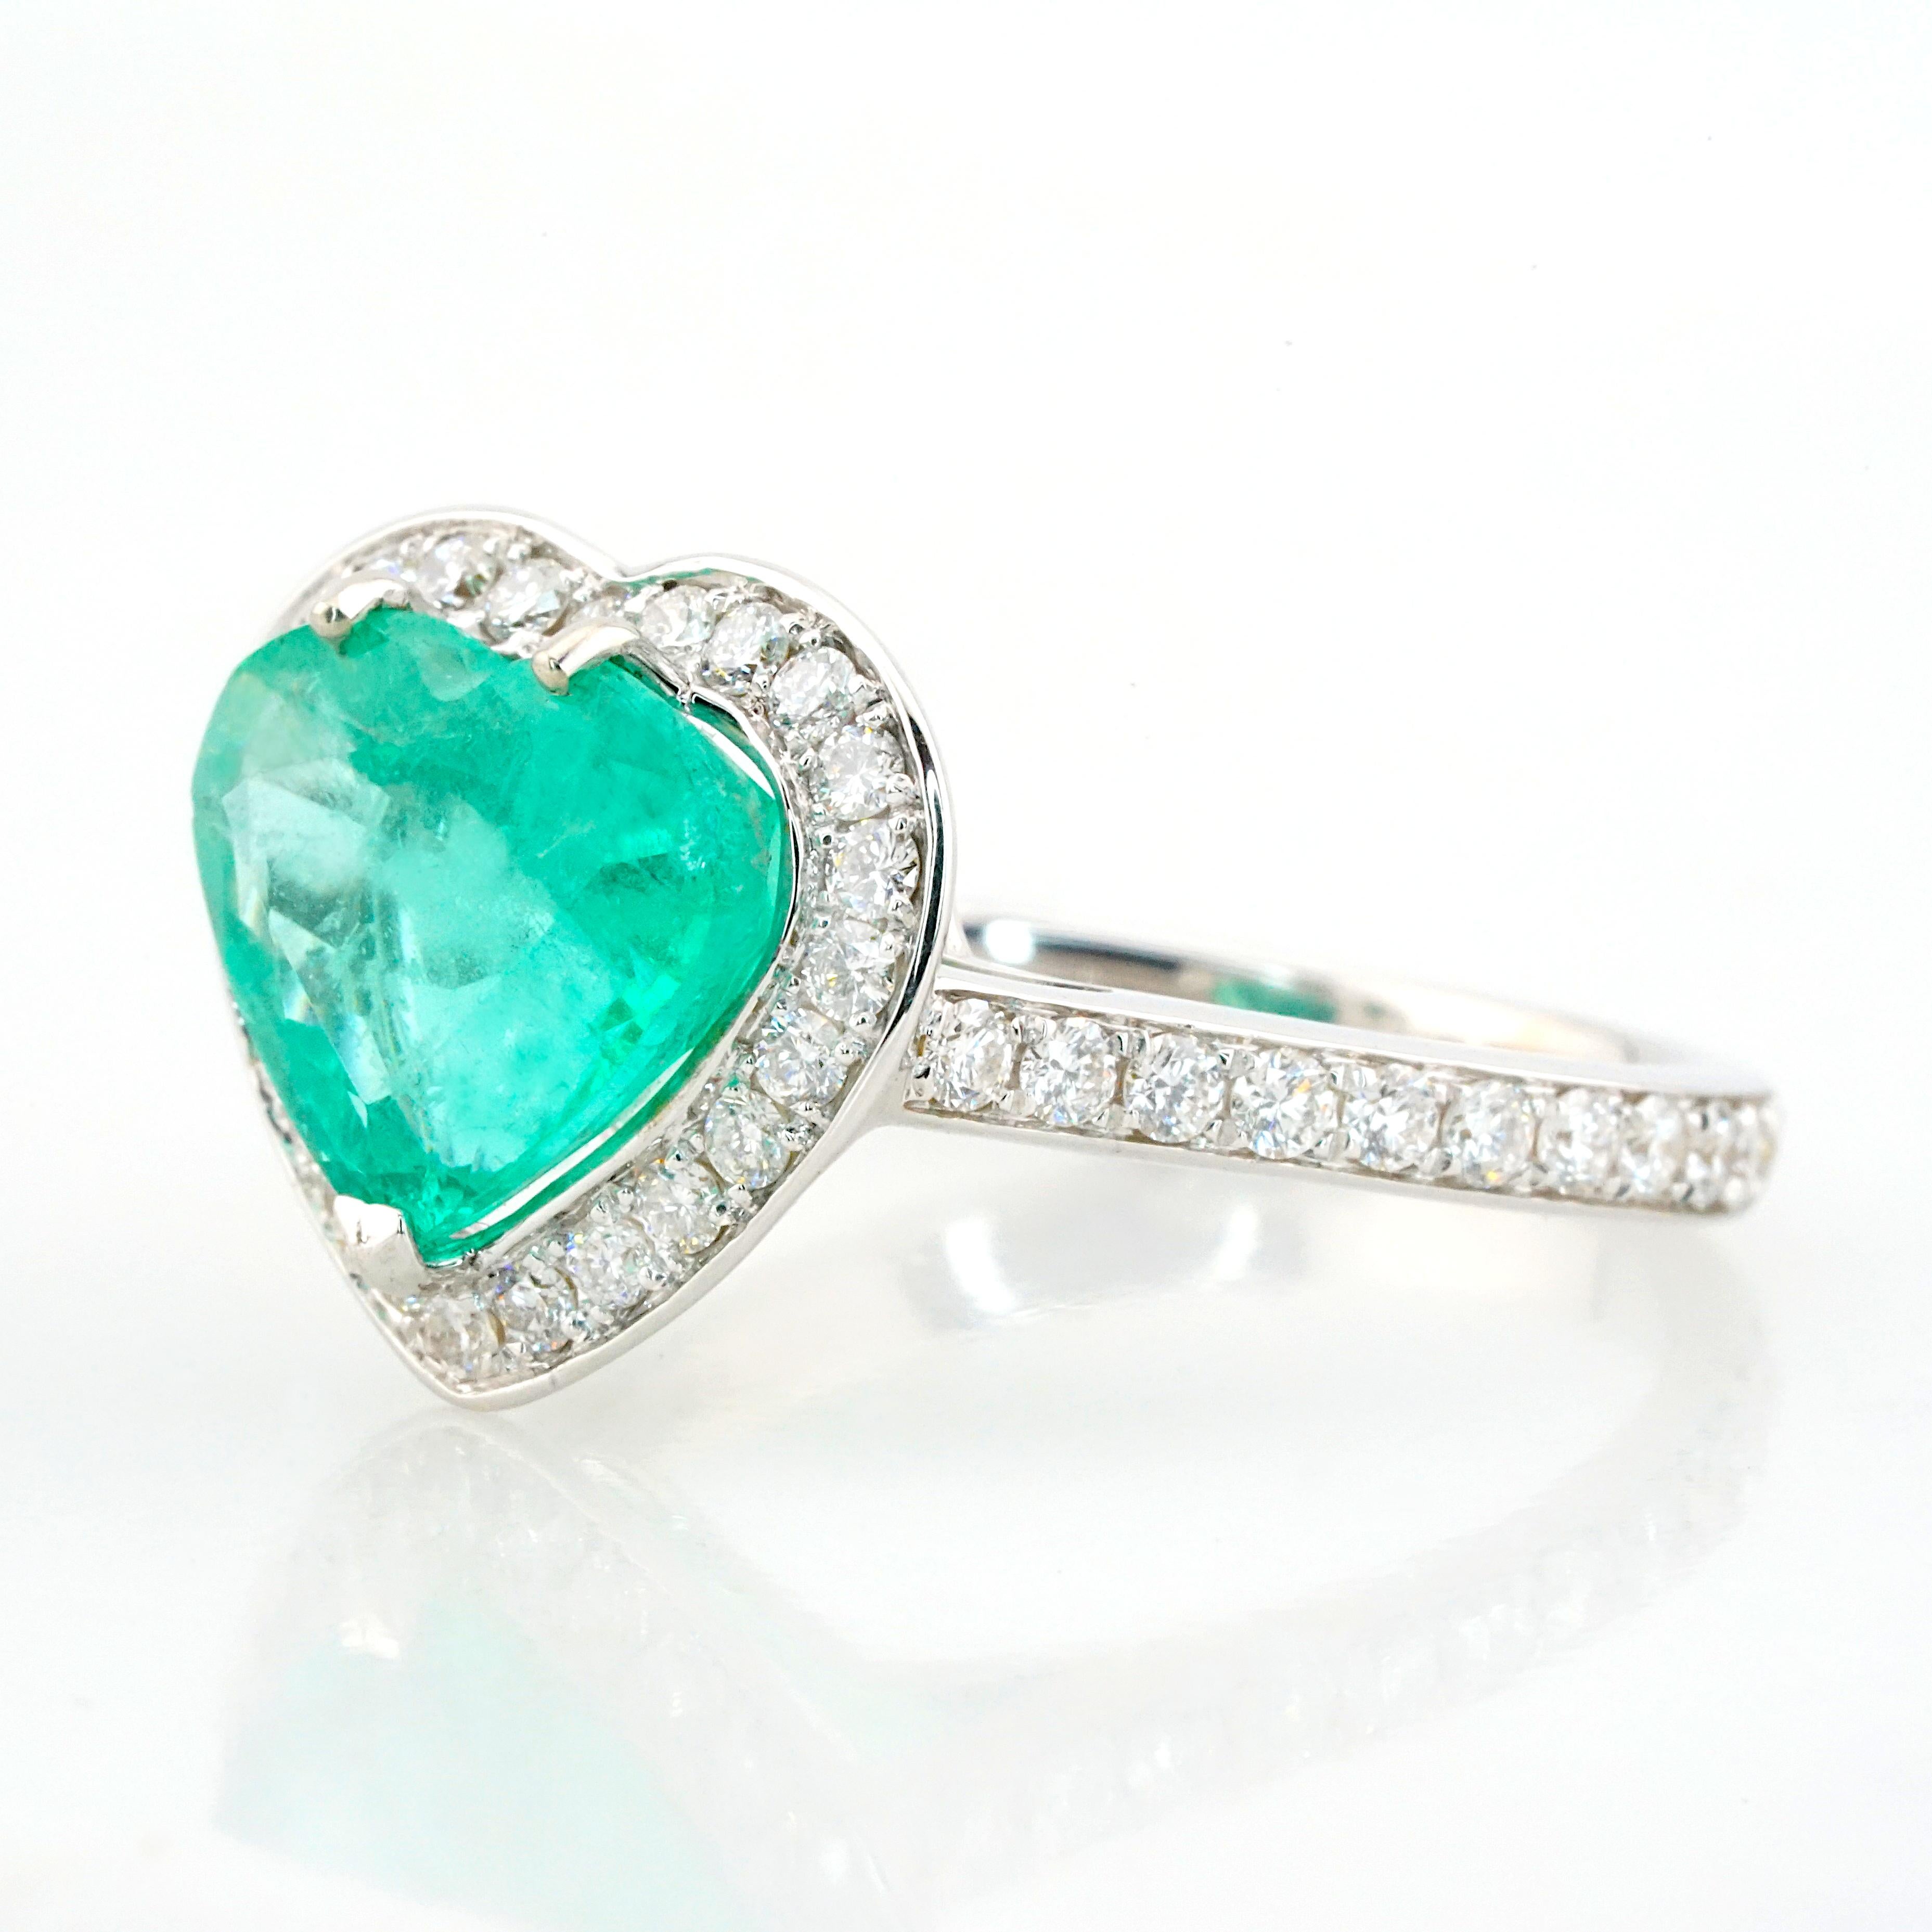 Presenting an exquisite creation from Antinori Di Sanpietro, this ring is truly a marvel to behold. At its heart lies a captivating centerpiece—a stunning 3.72-carat heart-shaped Zambian emerald, meticulously certified by the IGI Lab. Encircled by a